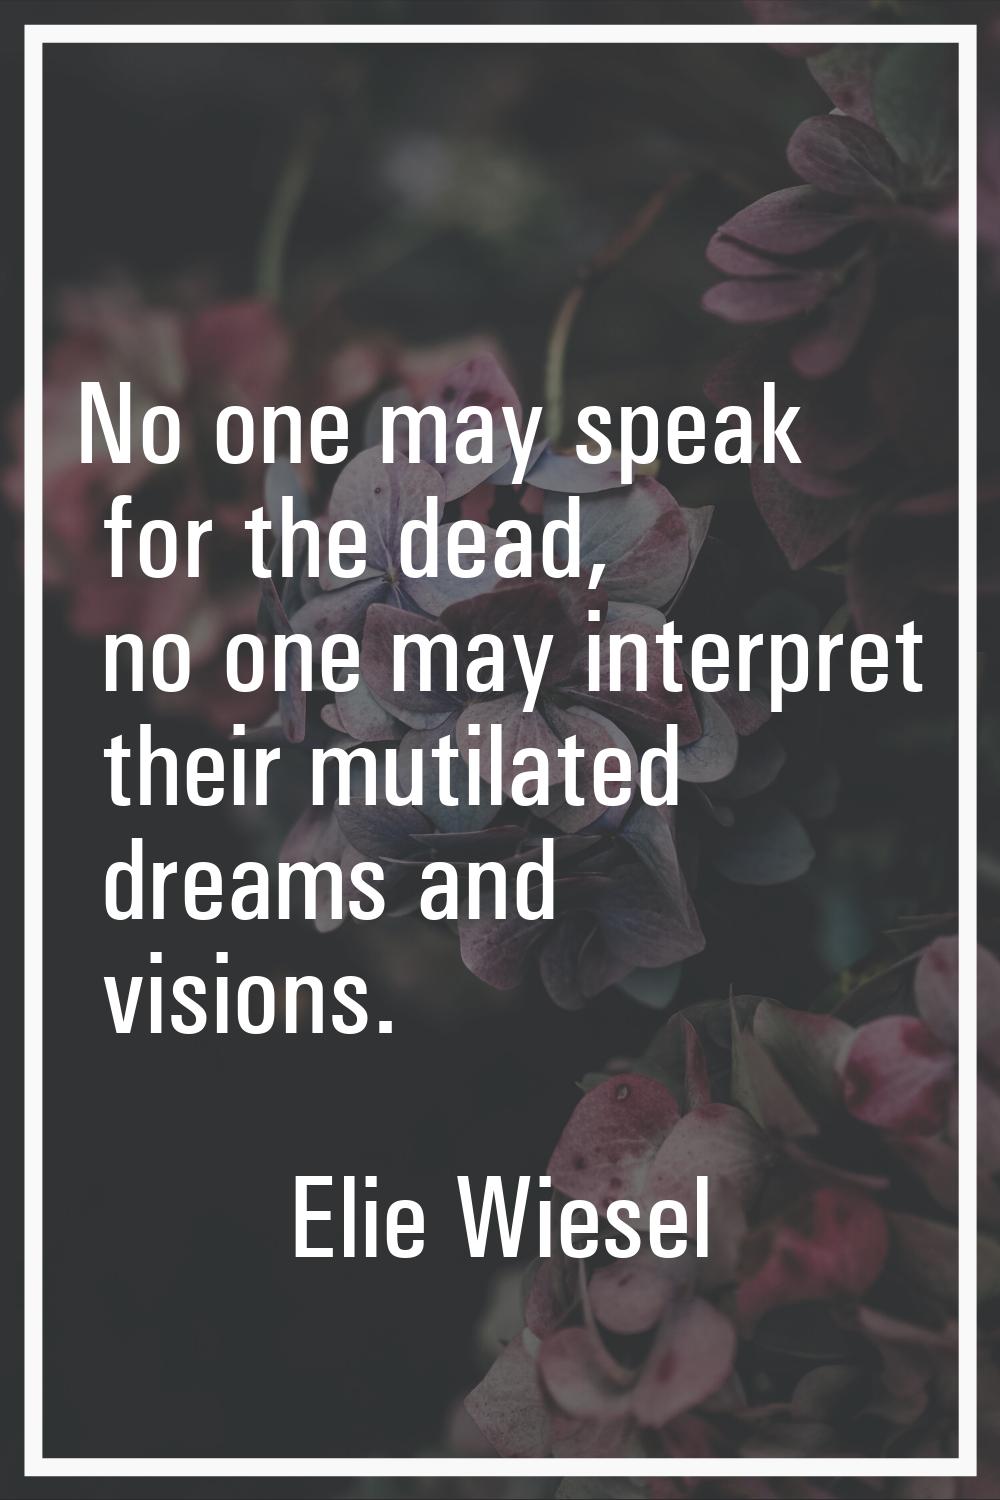 No one may speak for the dead, no one may interpret their mutilated dreams and visions.